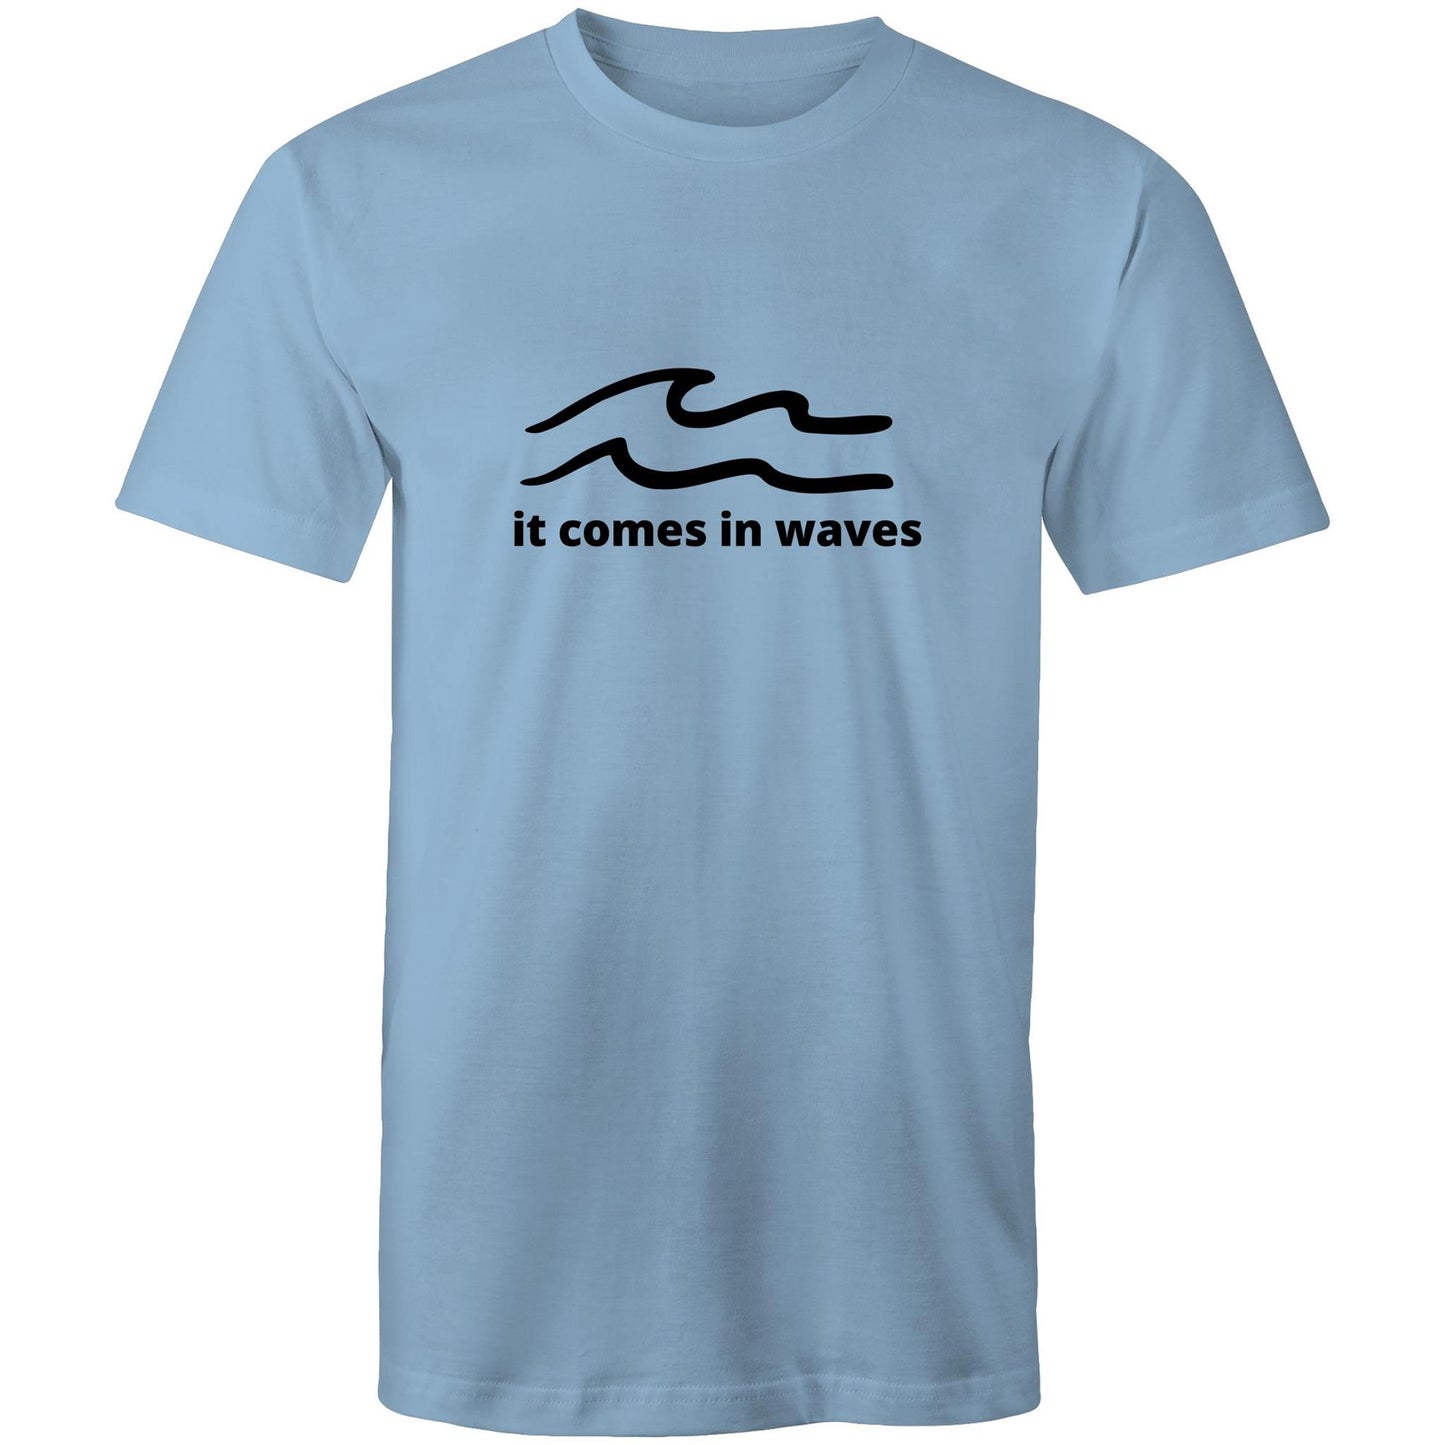 Current Mood 'IT COMES IN WAVES' Men's Tee